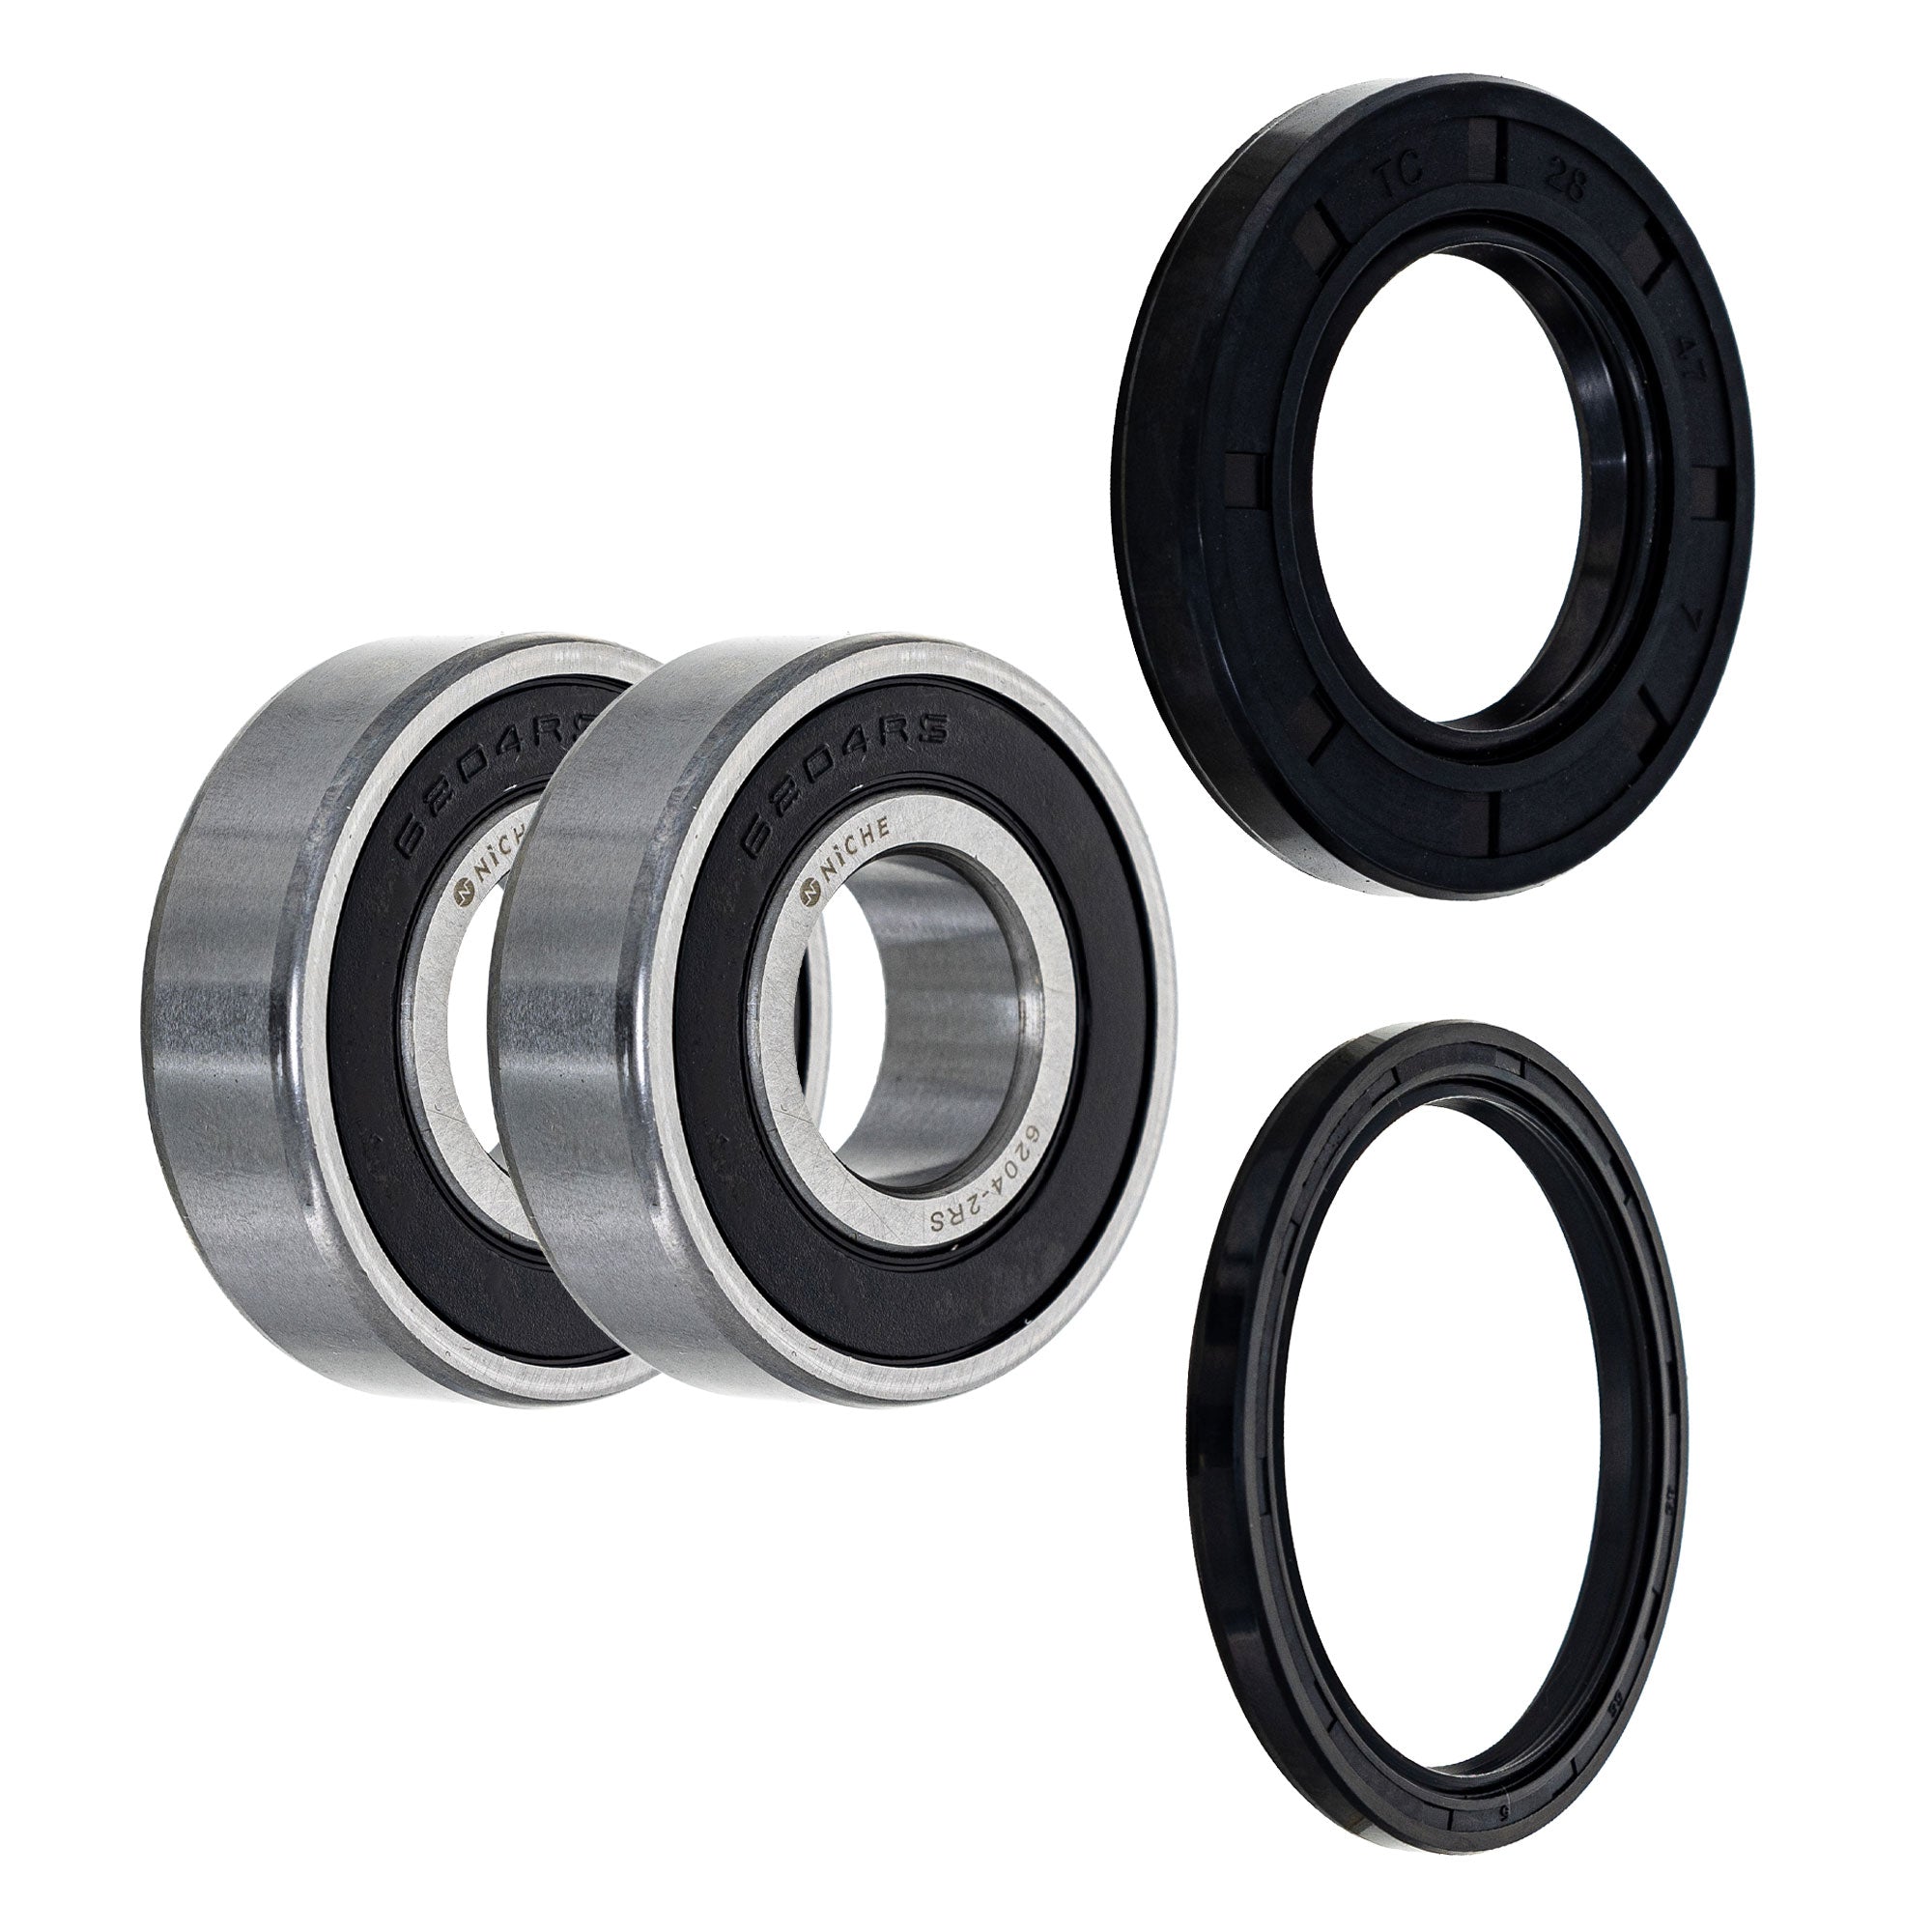 Wheel Bearing Seal Kit for zOTHER Ref No ST1100 NICHE MK1009039